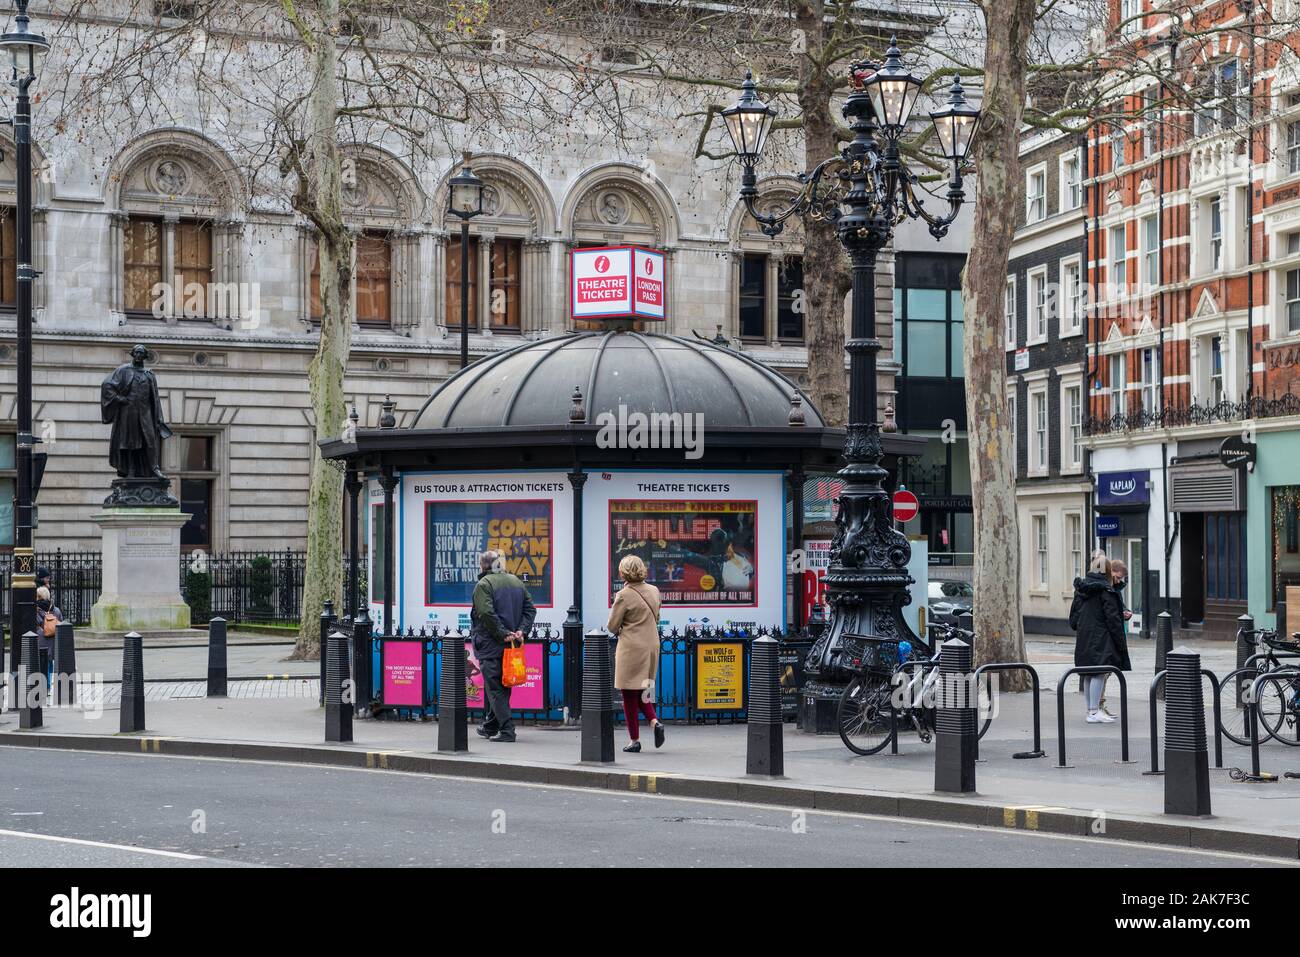 Tourism Island theatre ticket sales kiosk in Charing Cross Road, London,  England, UK Stock Photo - Alamy